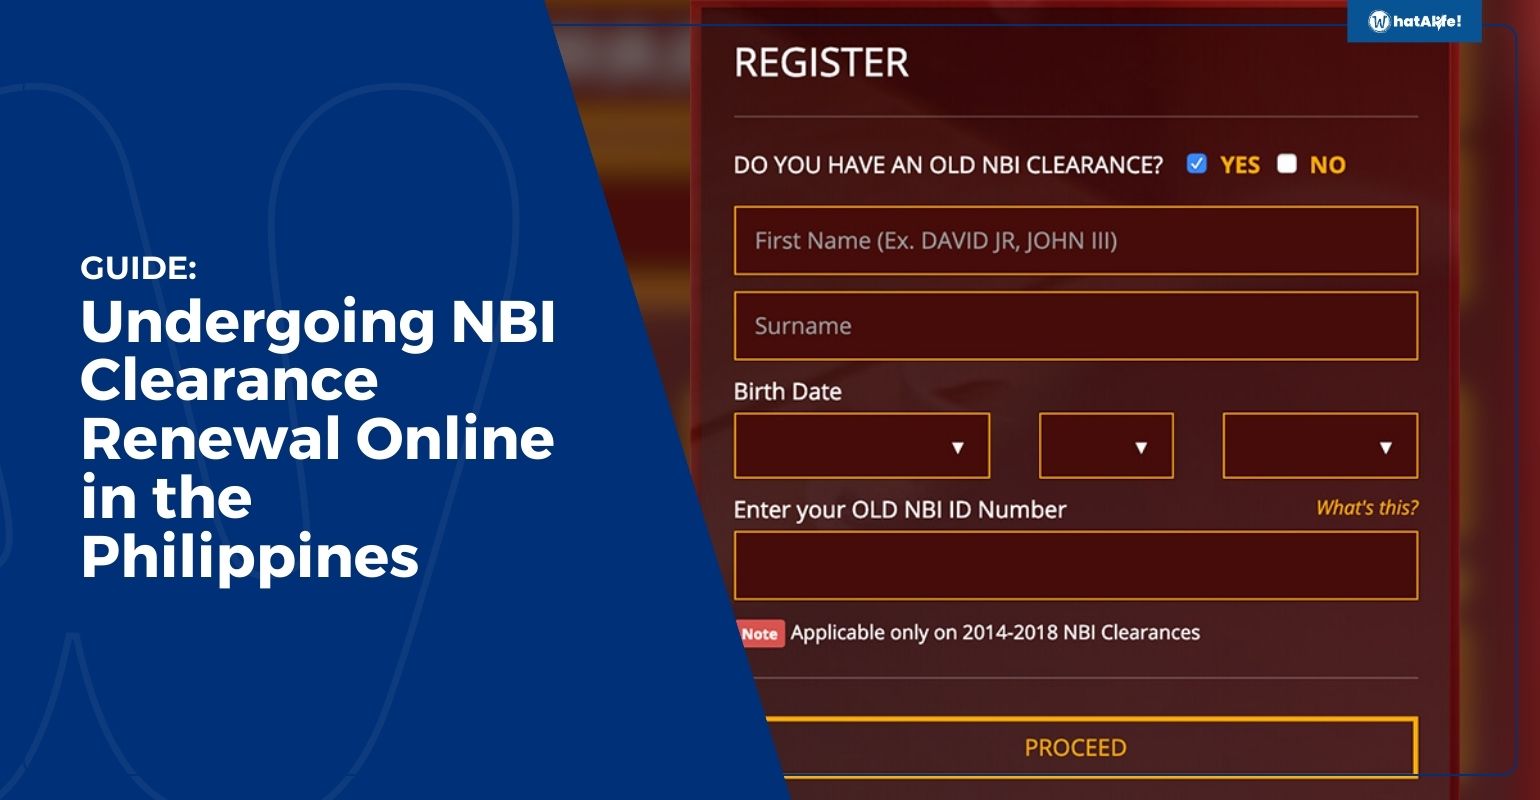 guide undergoing nbi clearance renewal online in the philippines